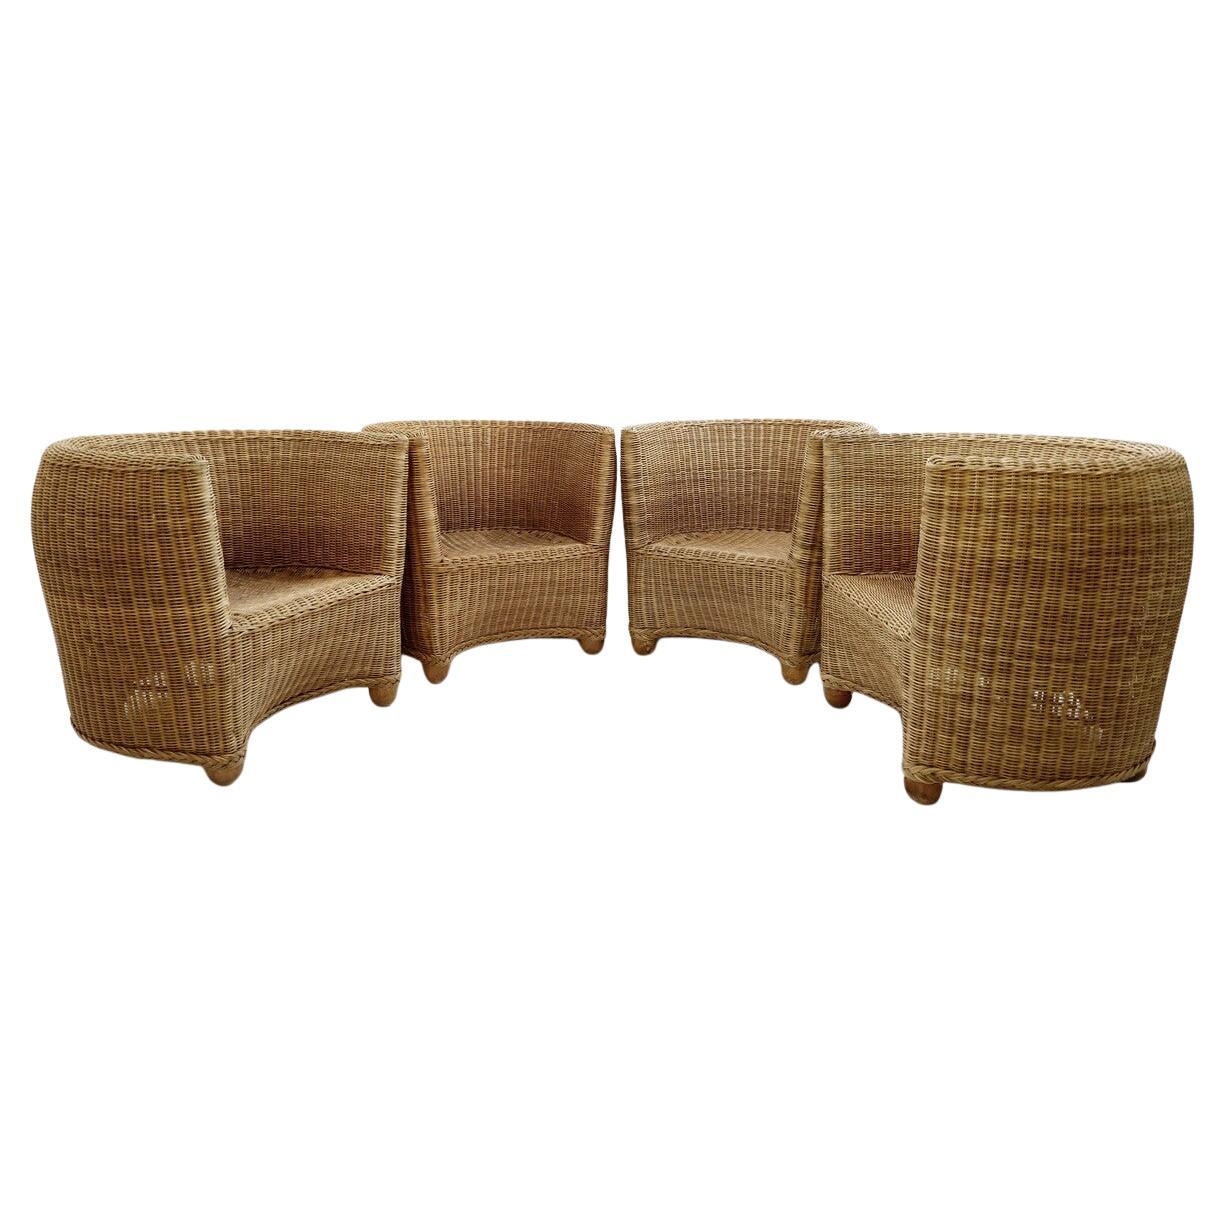 Set of 4 Mid-Century Modern Wickers Armchairs